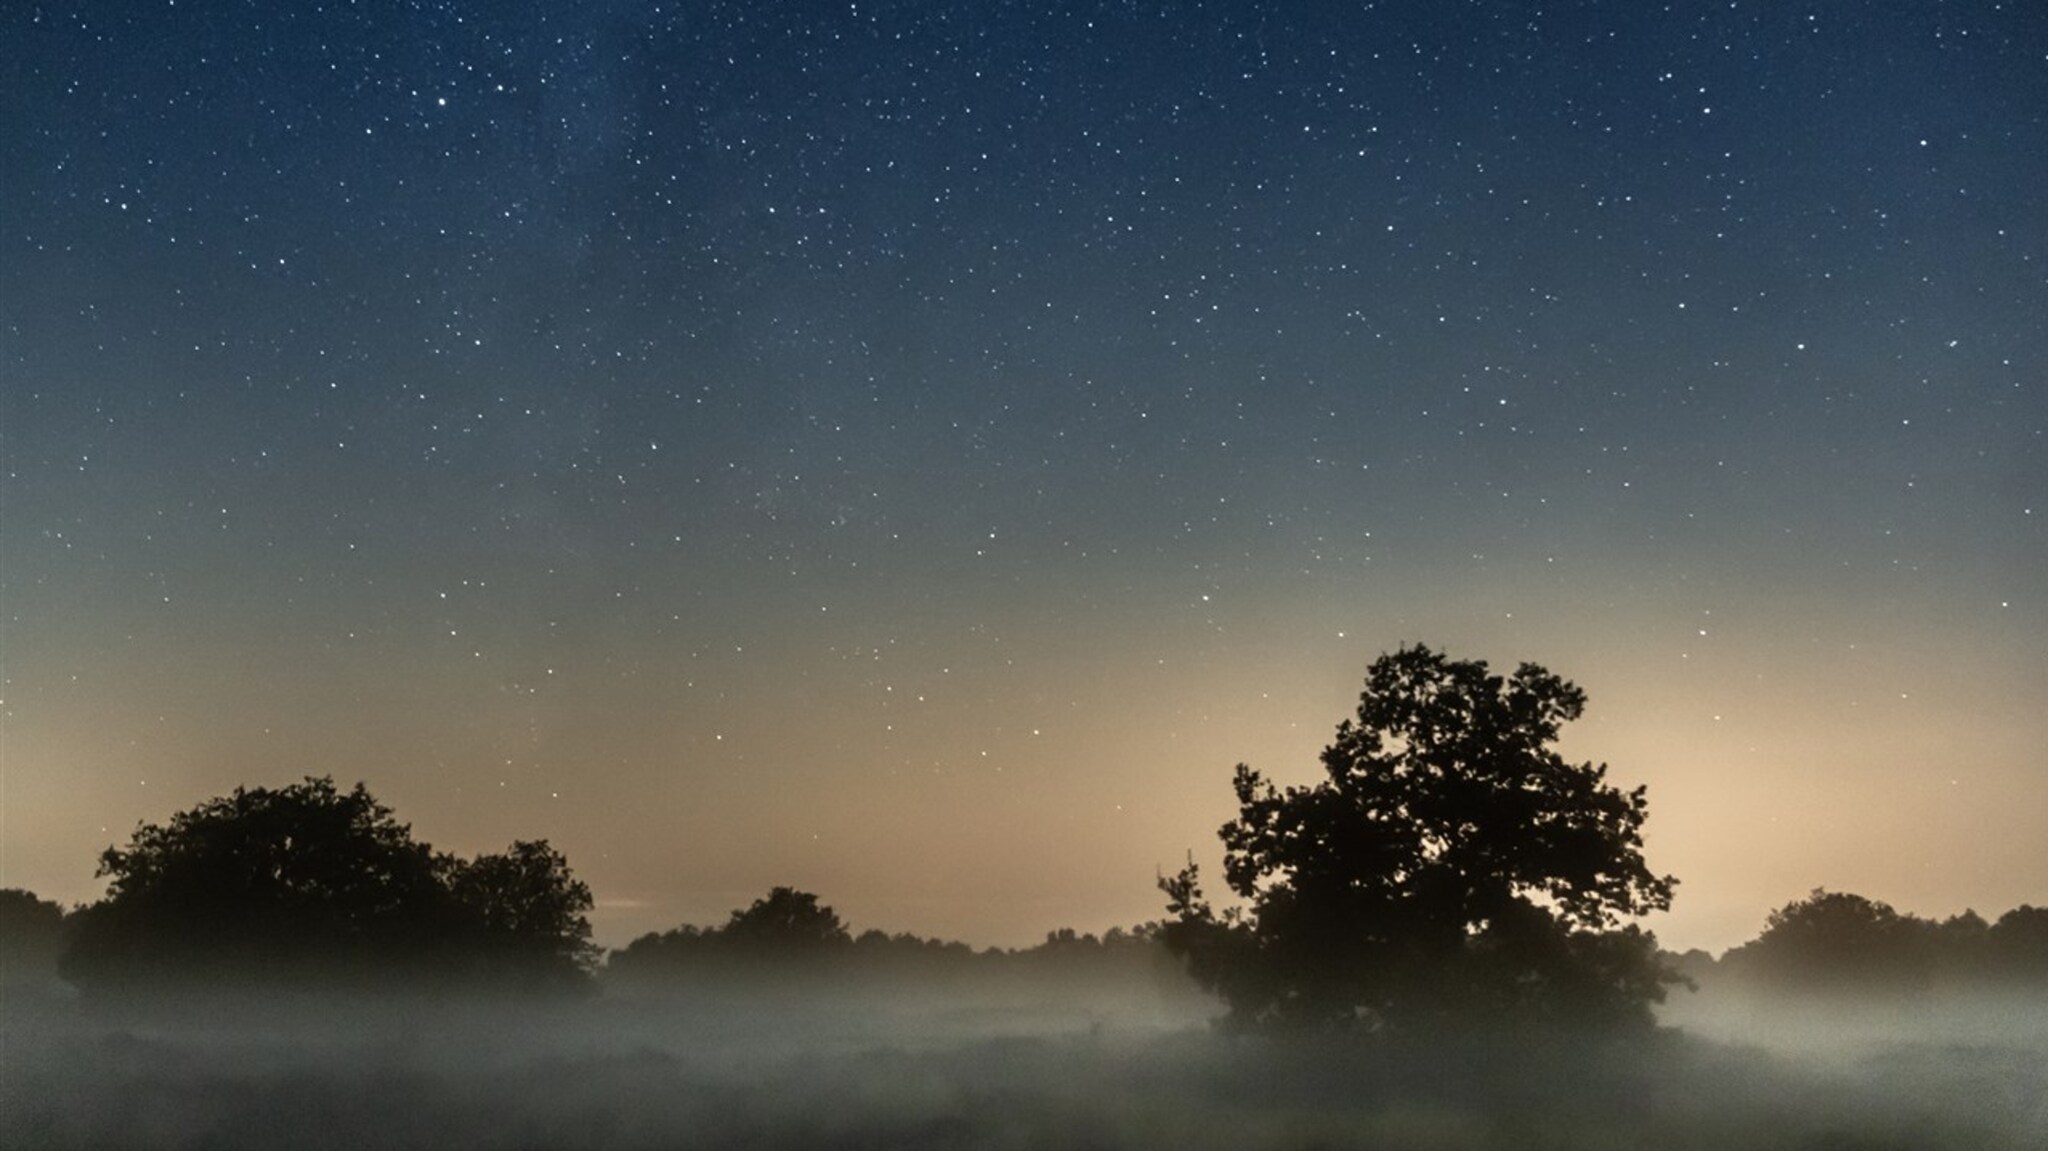 The stars may not be visible after 20 years due to increased light pollution